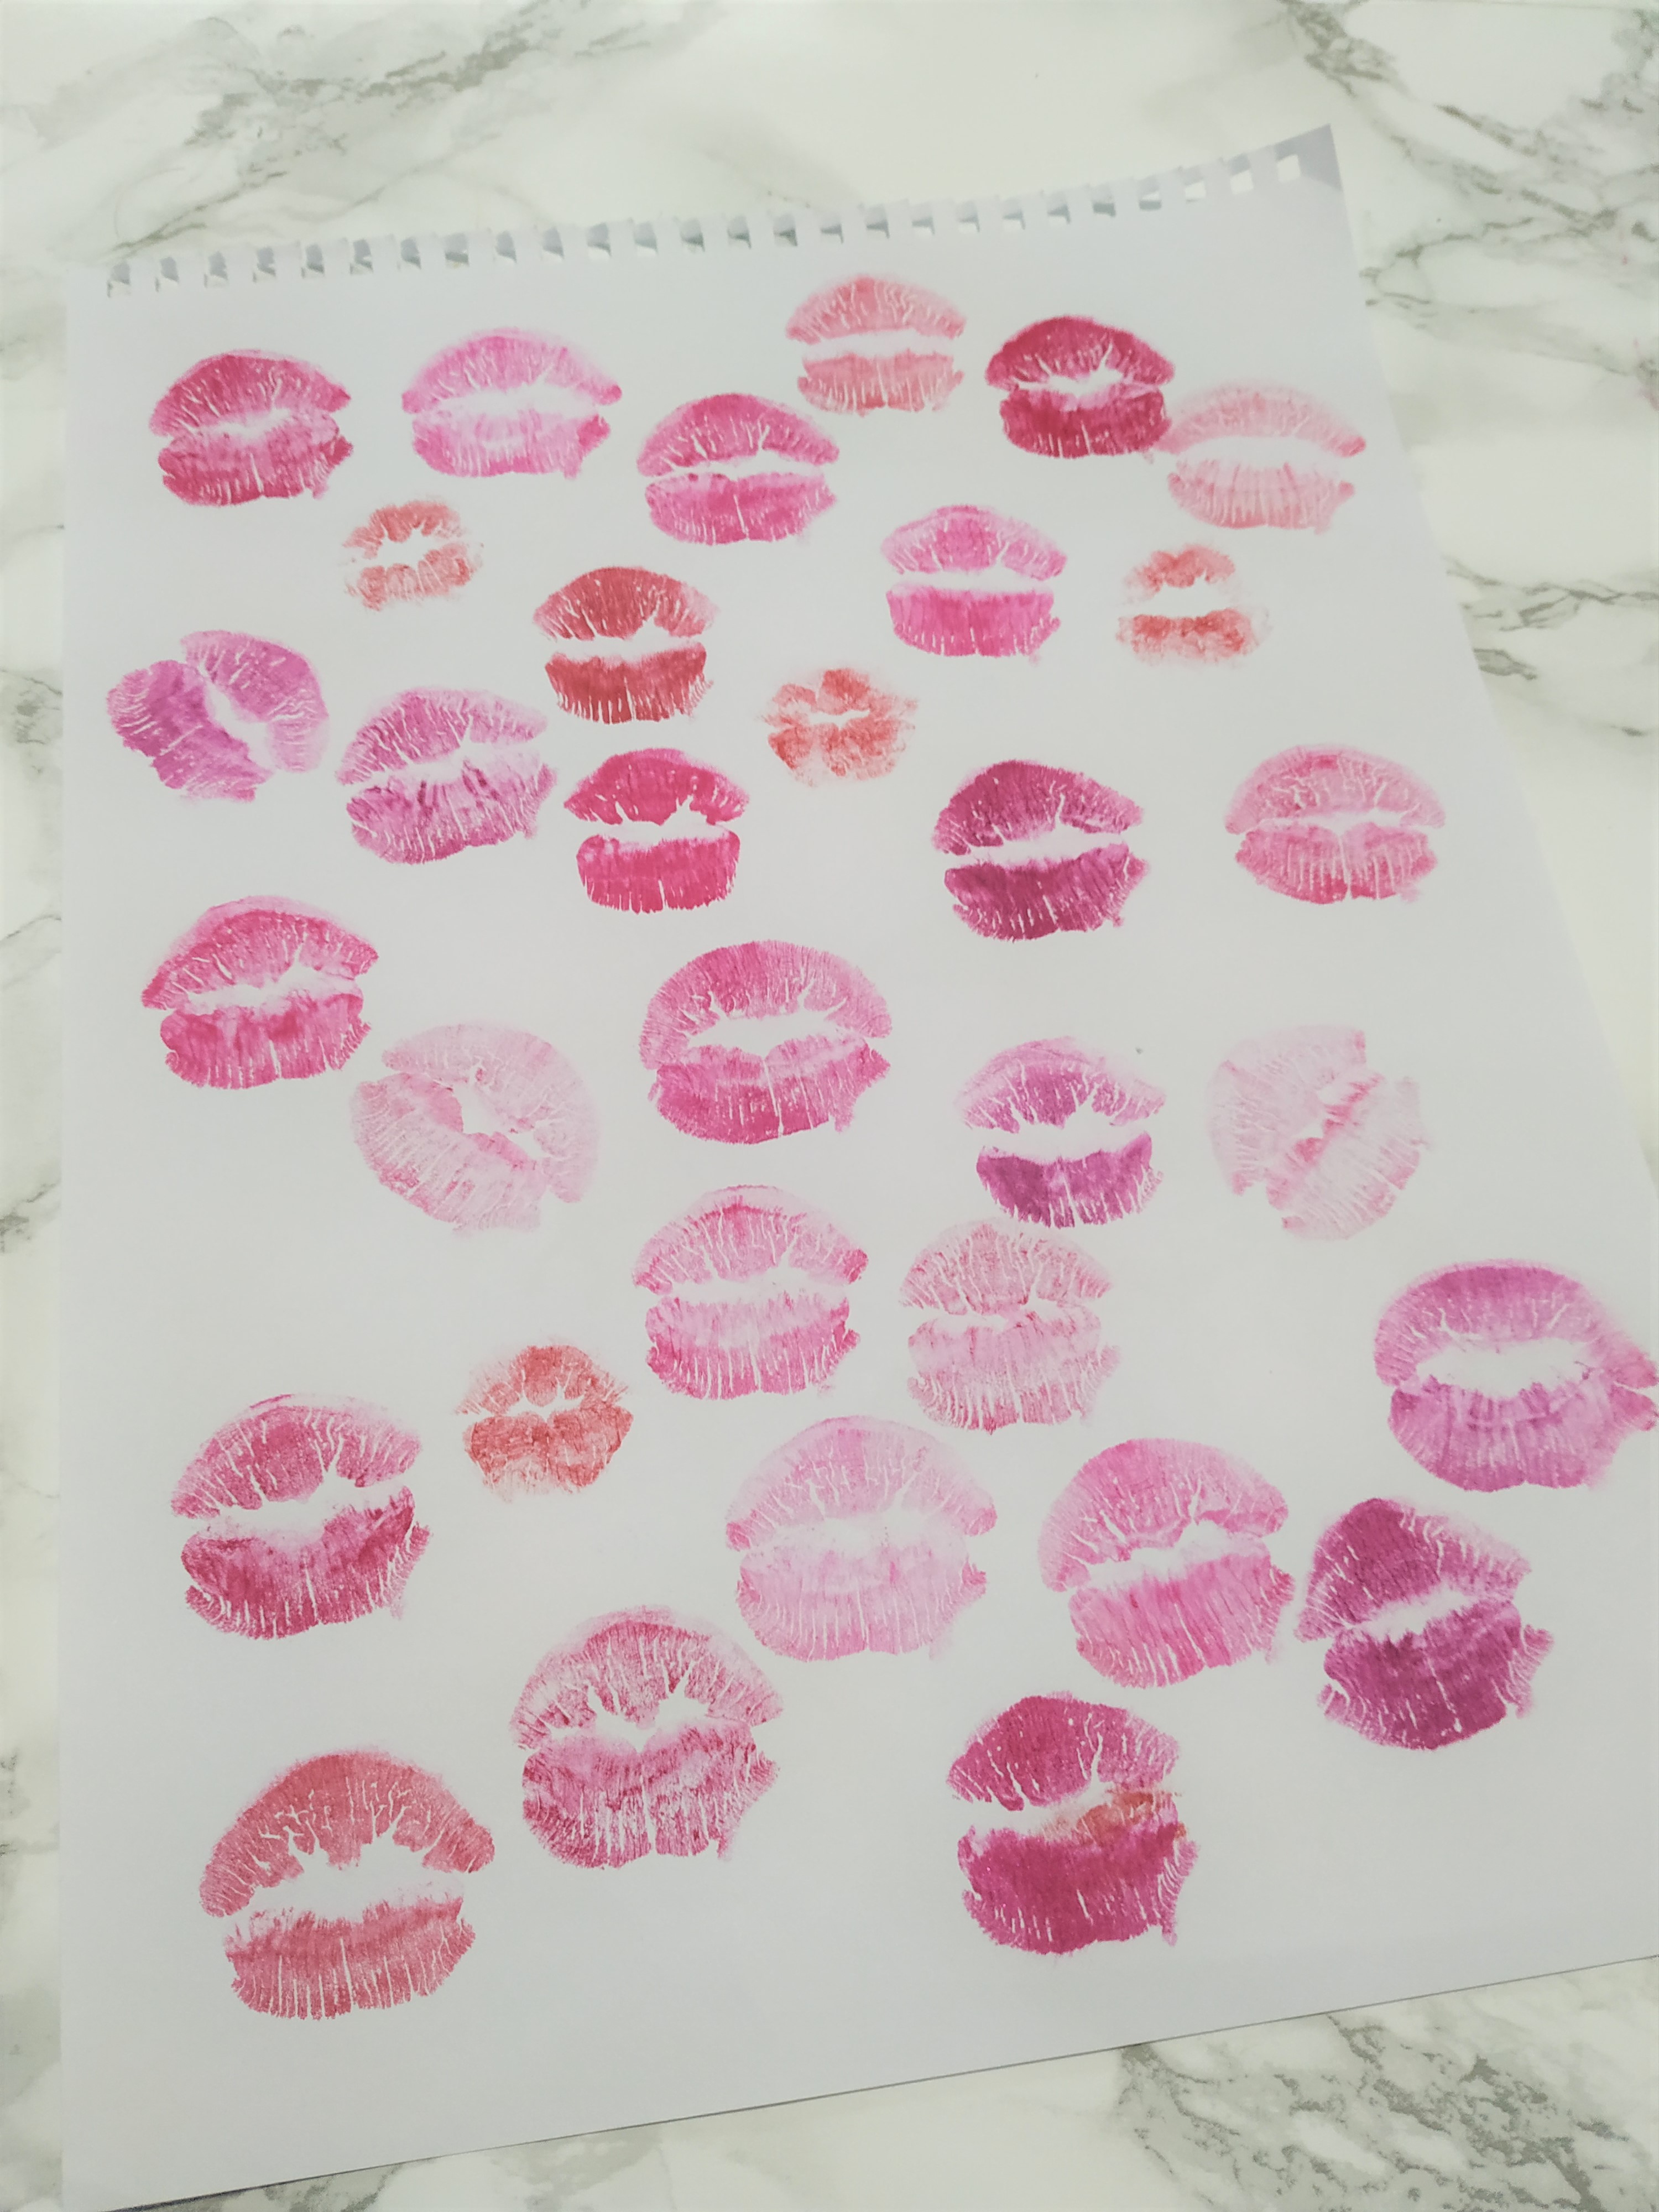 Paper filled with lipstick kisses.